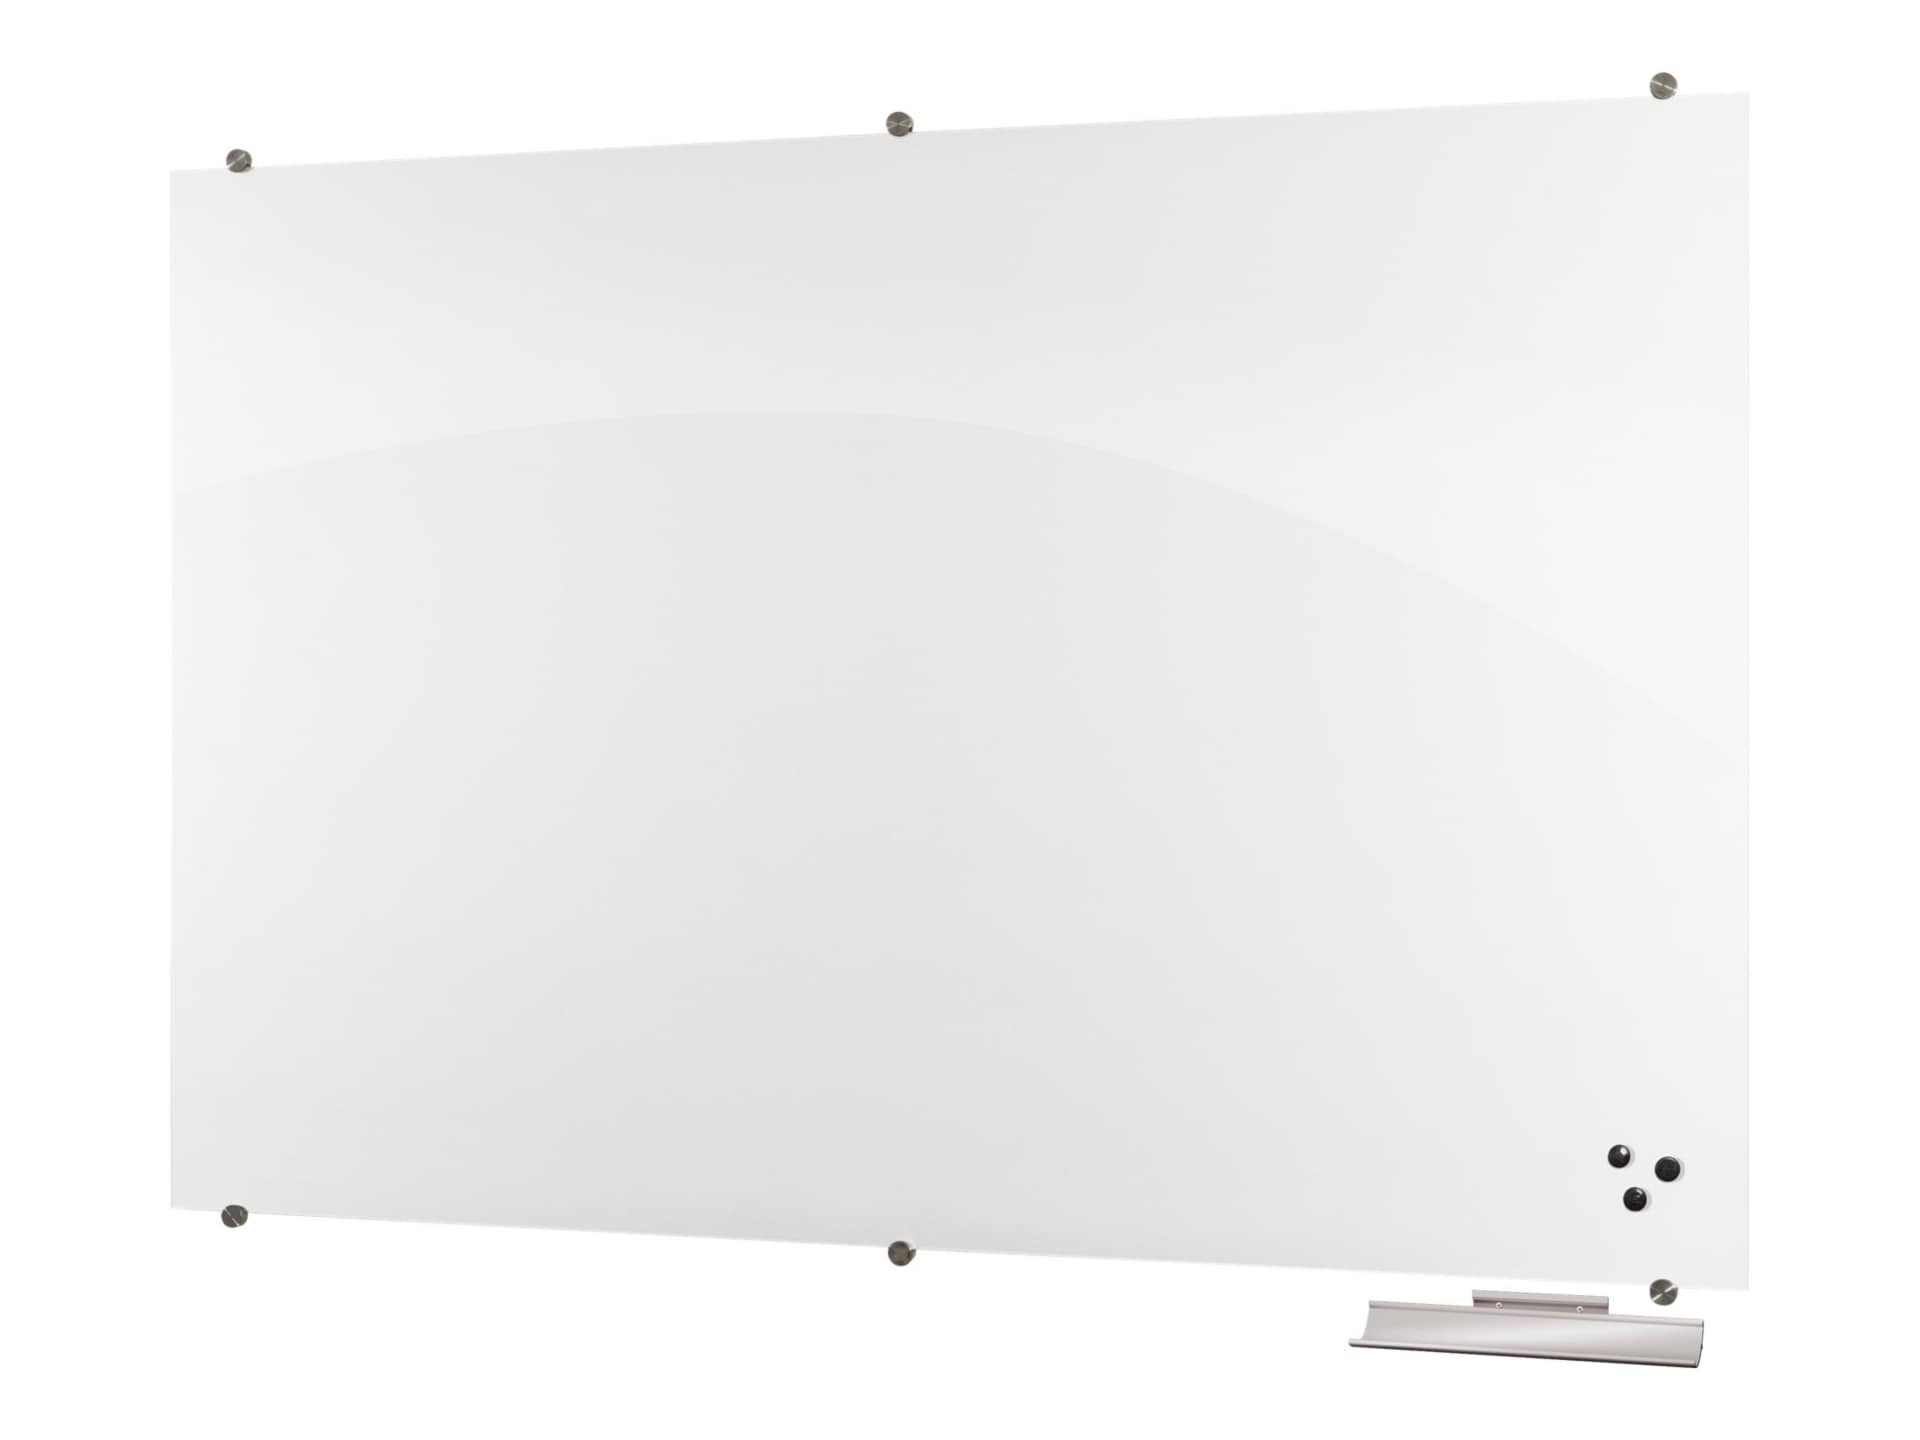 Best-Rite Visionary whiteboard - 72 in x 48 in - white gloss